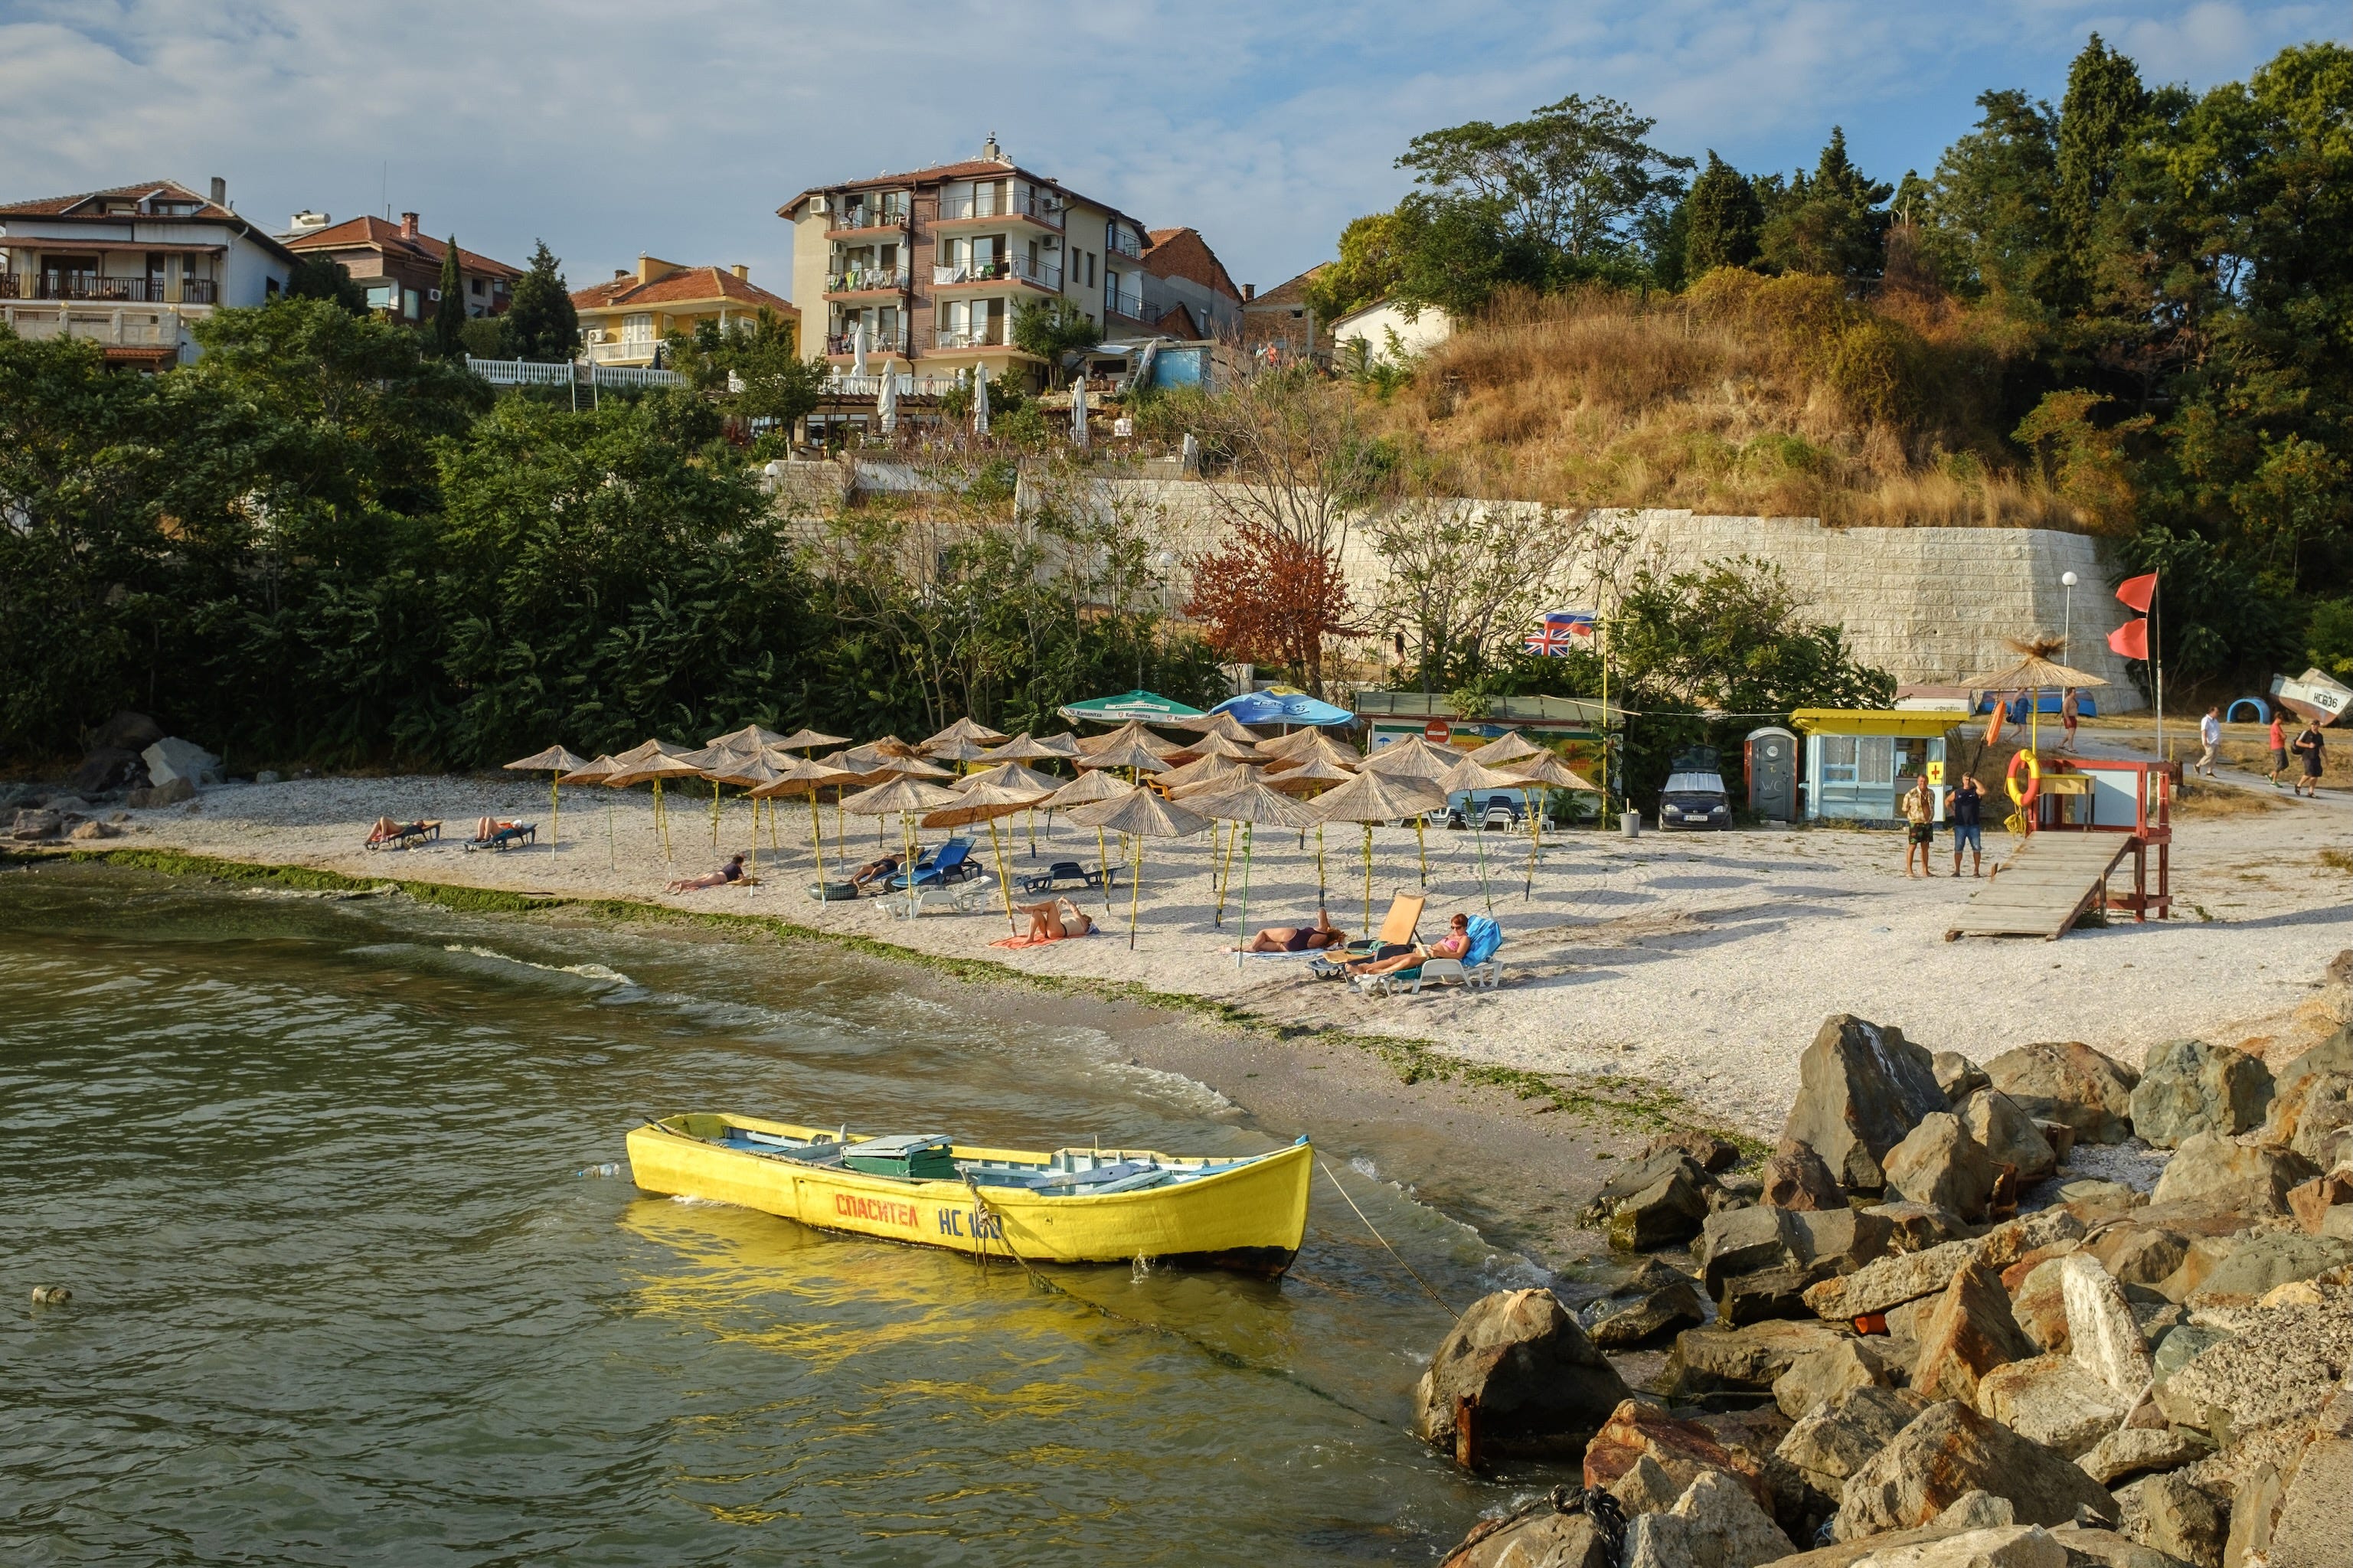 A beach in Nessebar. There's a yellow boat moored by some rocks, and lots of beach umbrellas out.